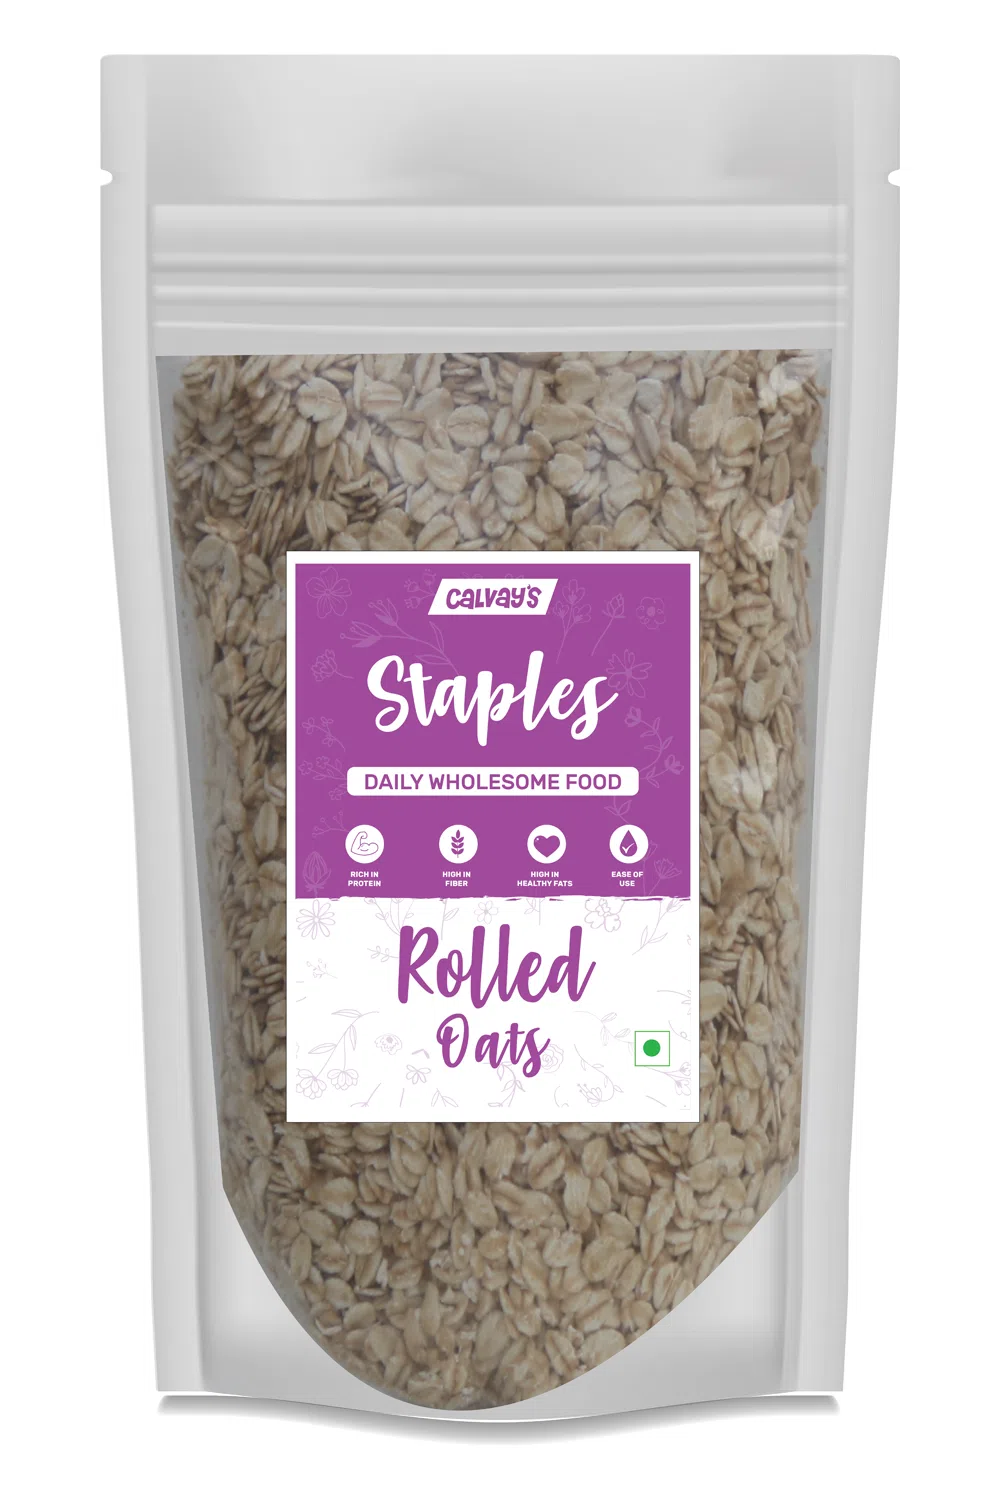 Calvay's Staples Rolled oats front